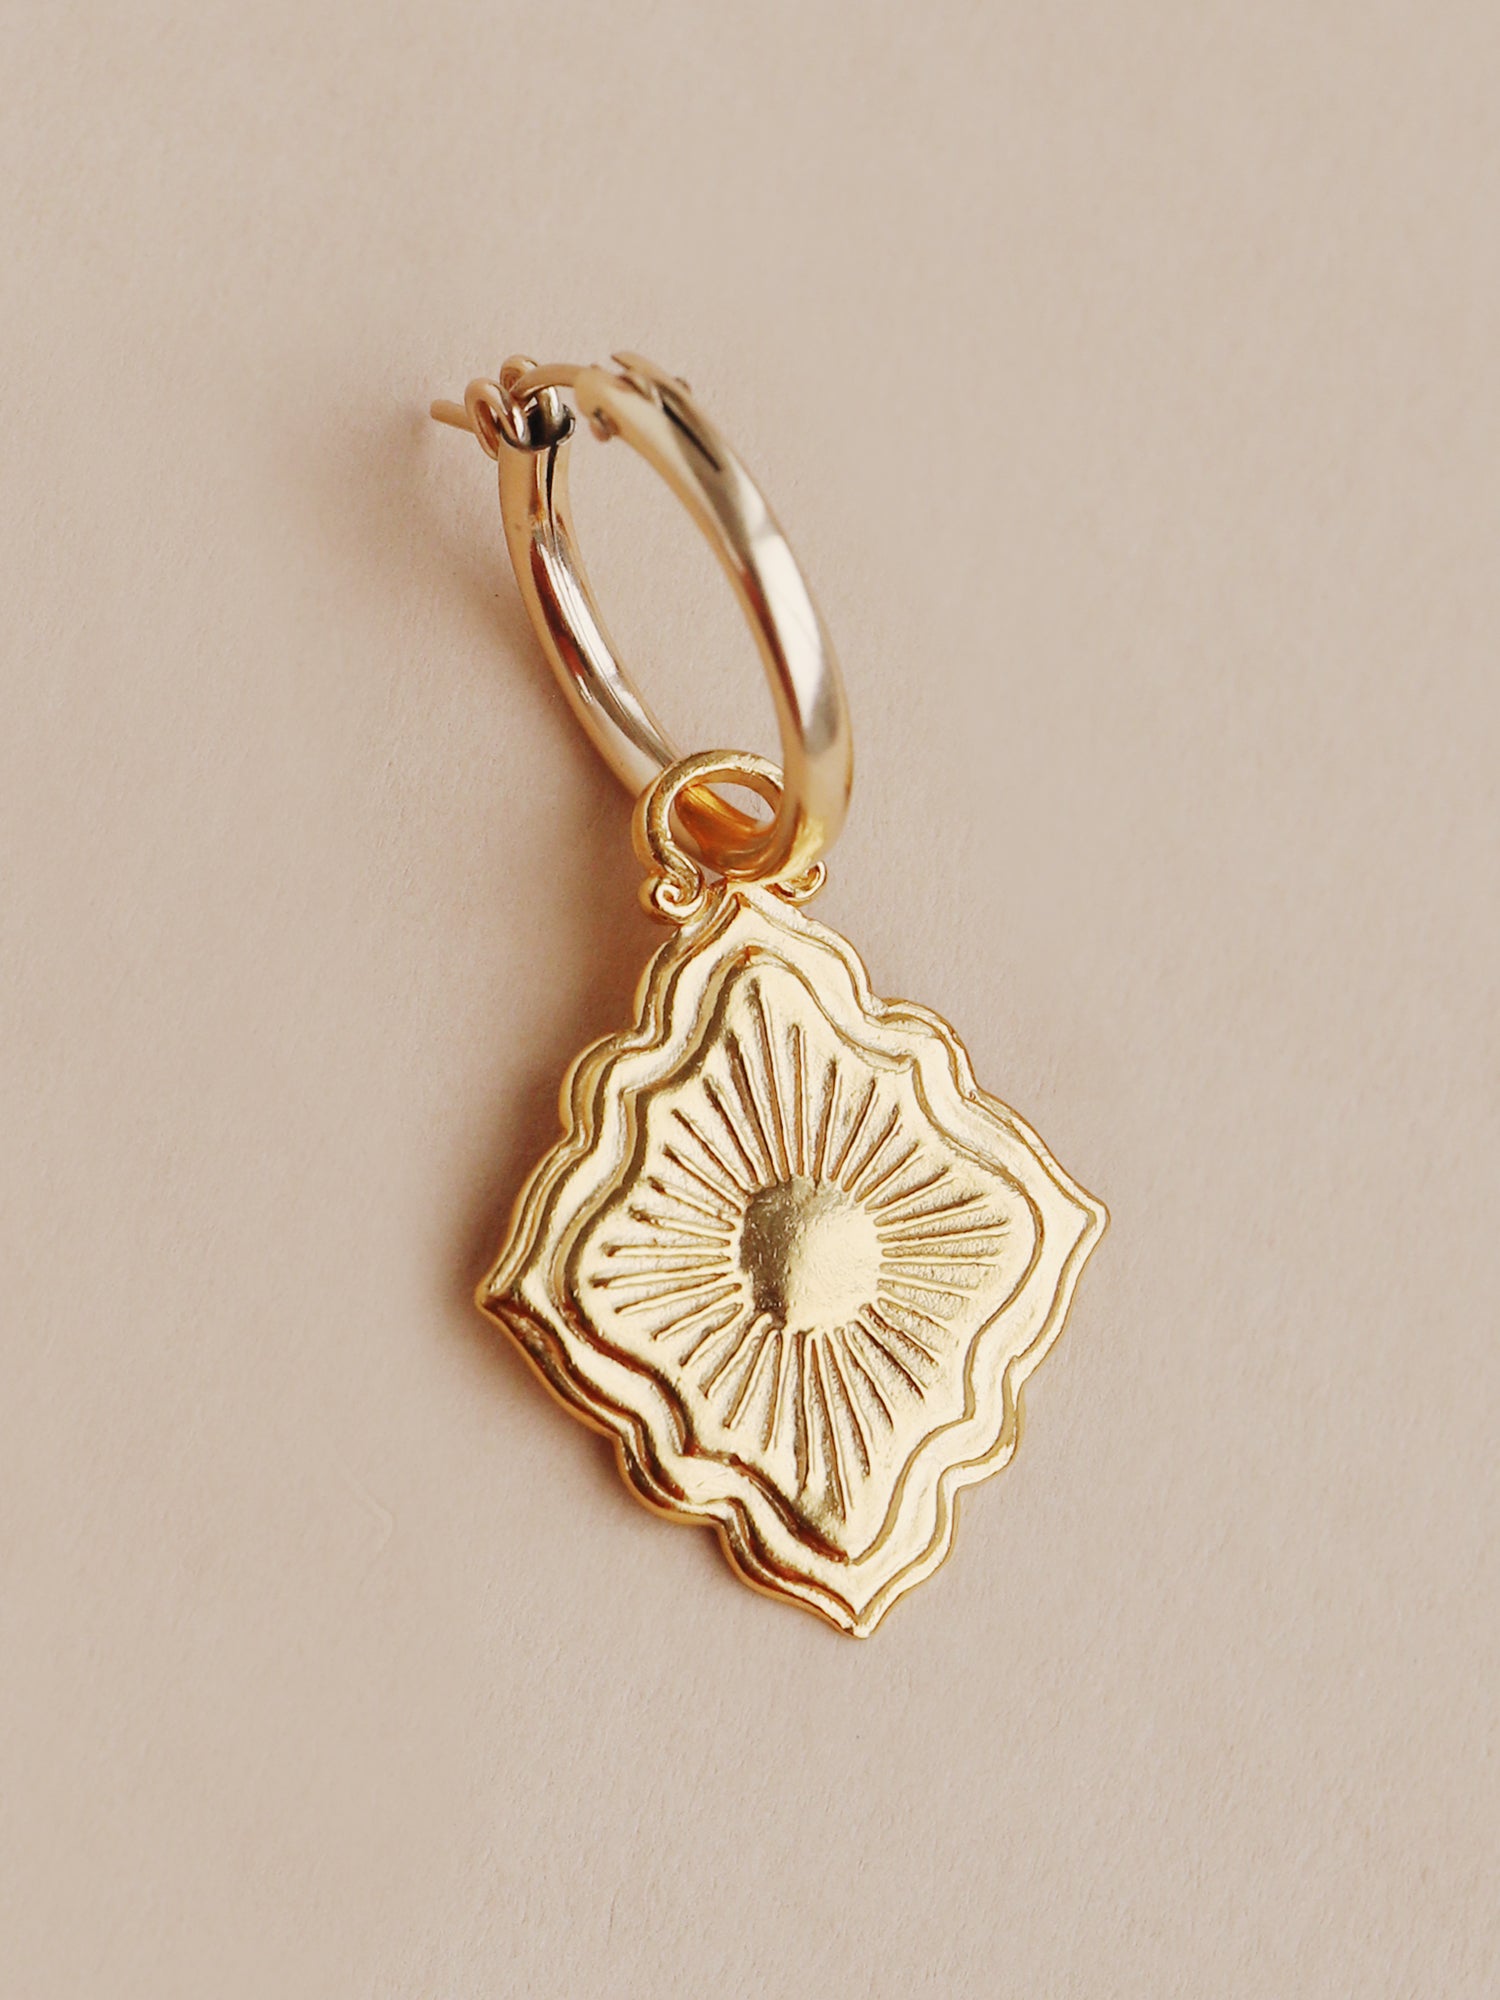 Leo - Individual Charm in Gold